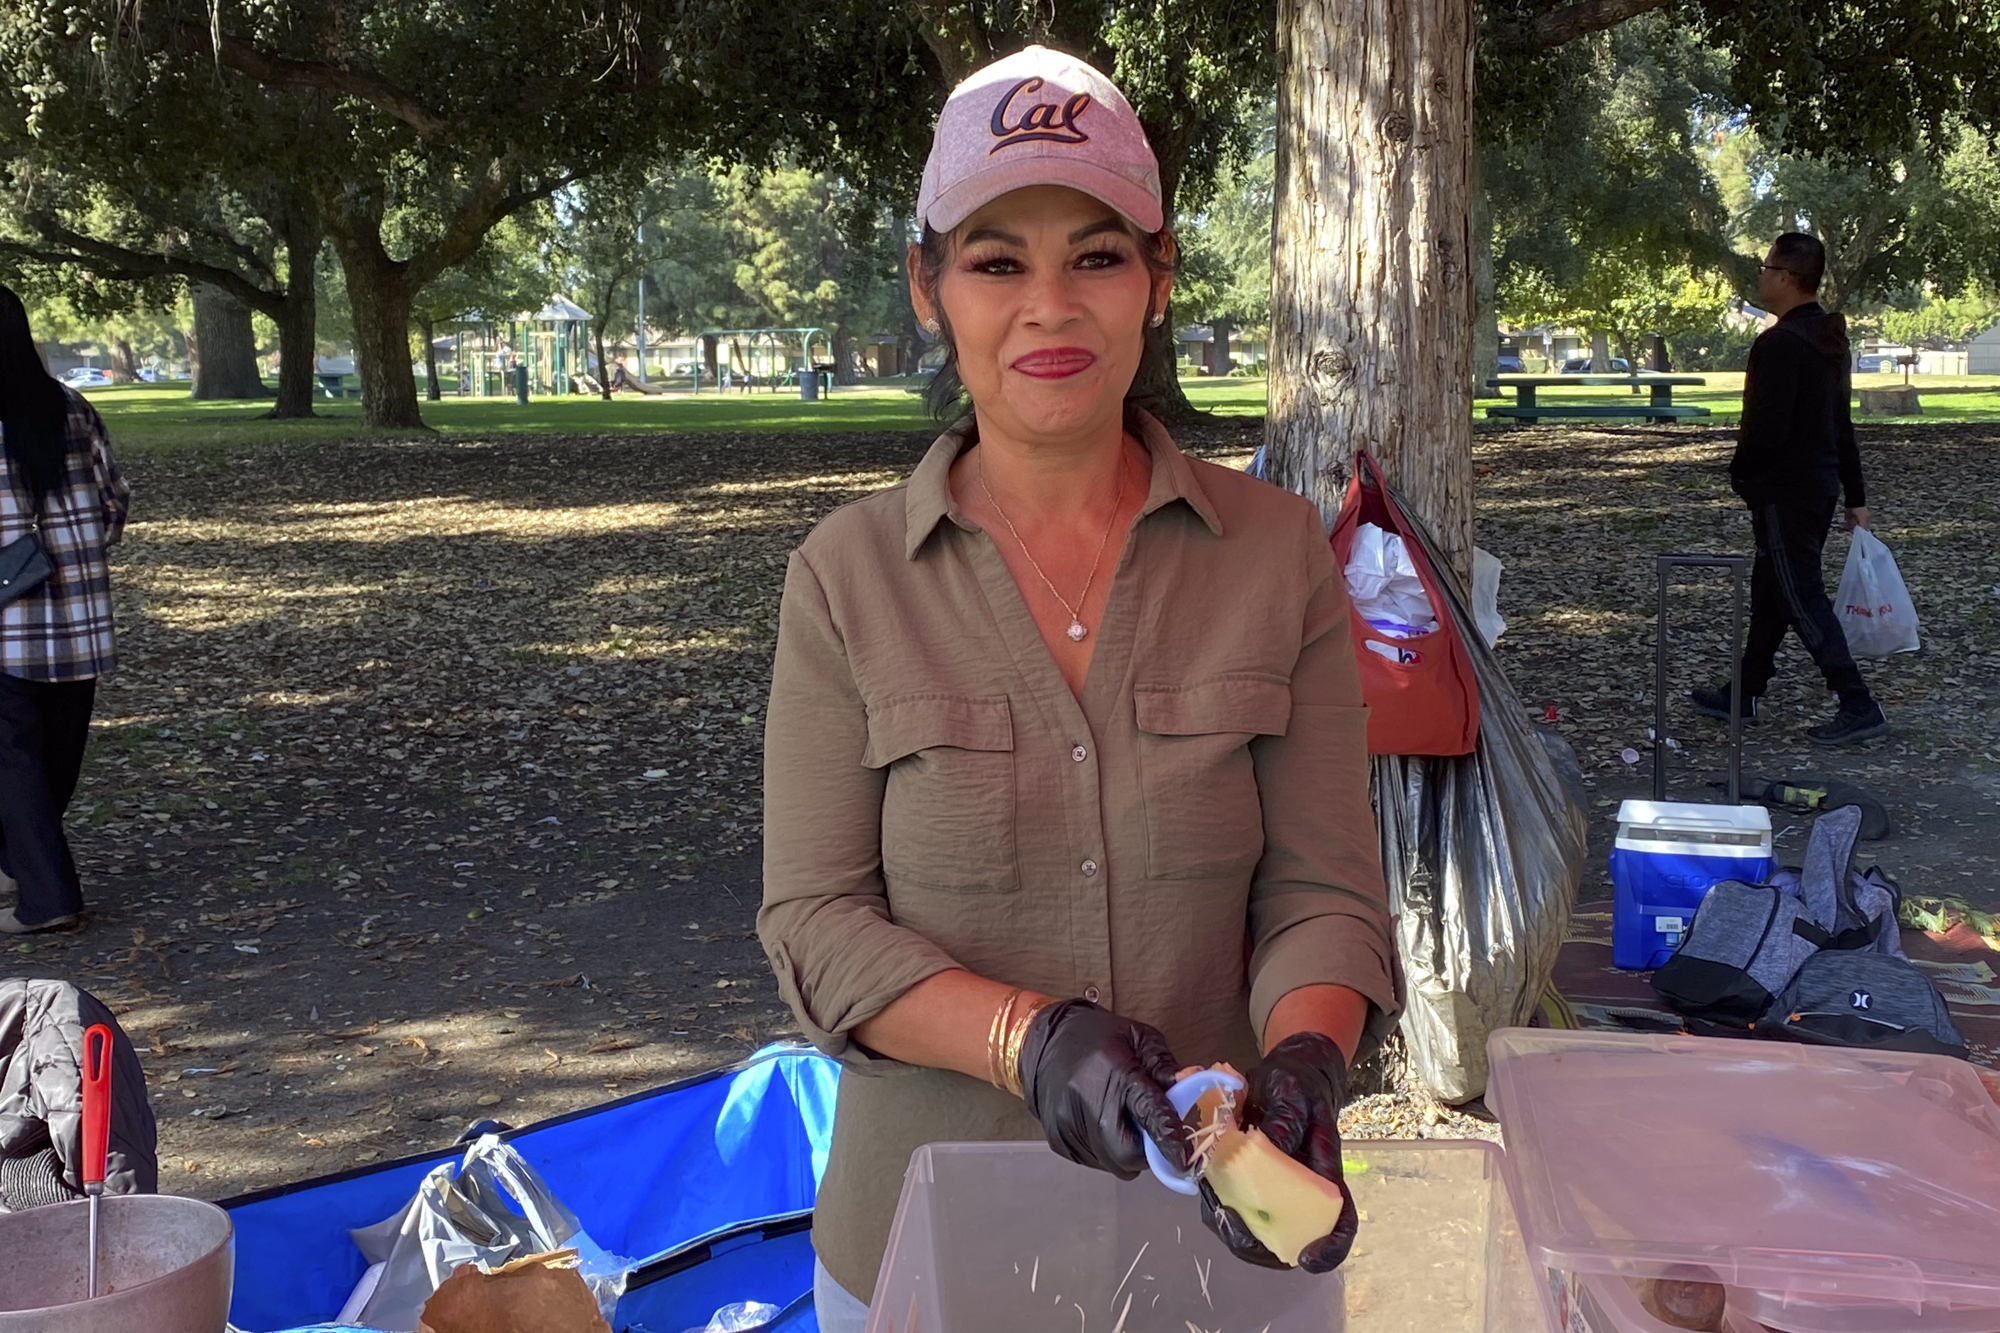 A person wearing a baseball cap smiles while working with food in an park setting.